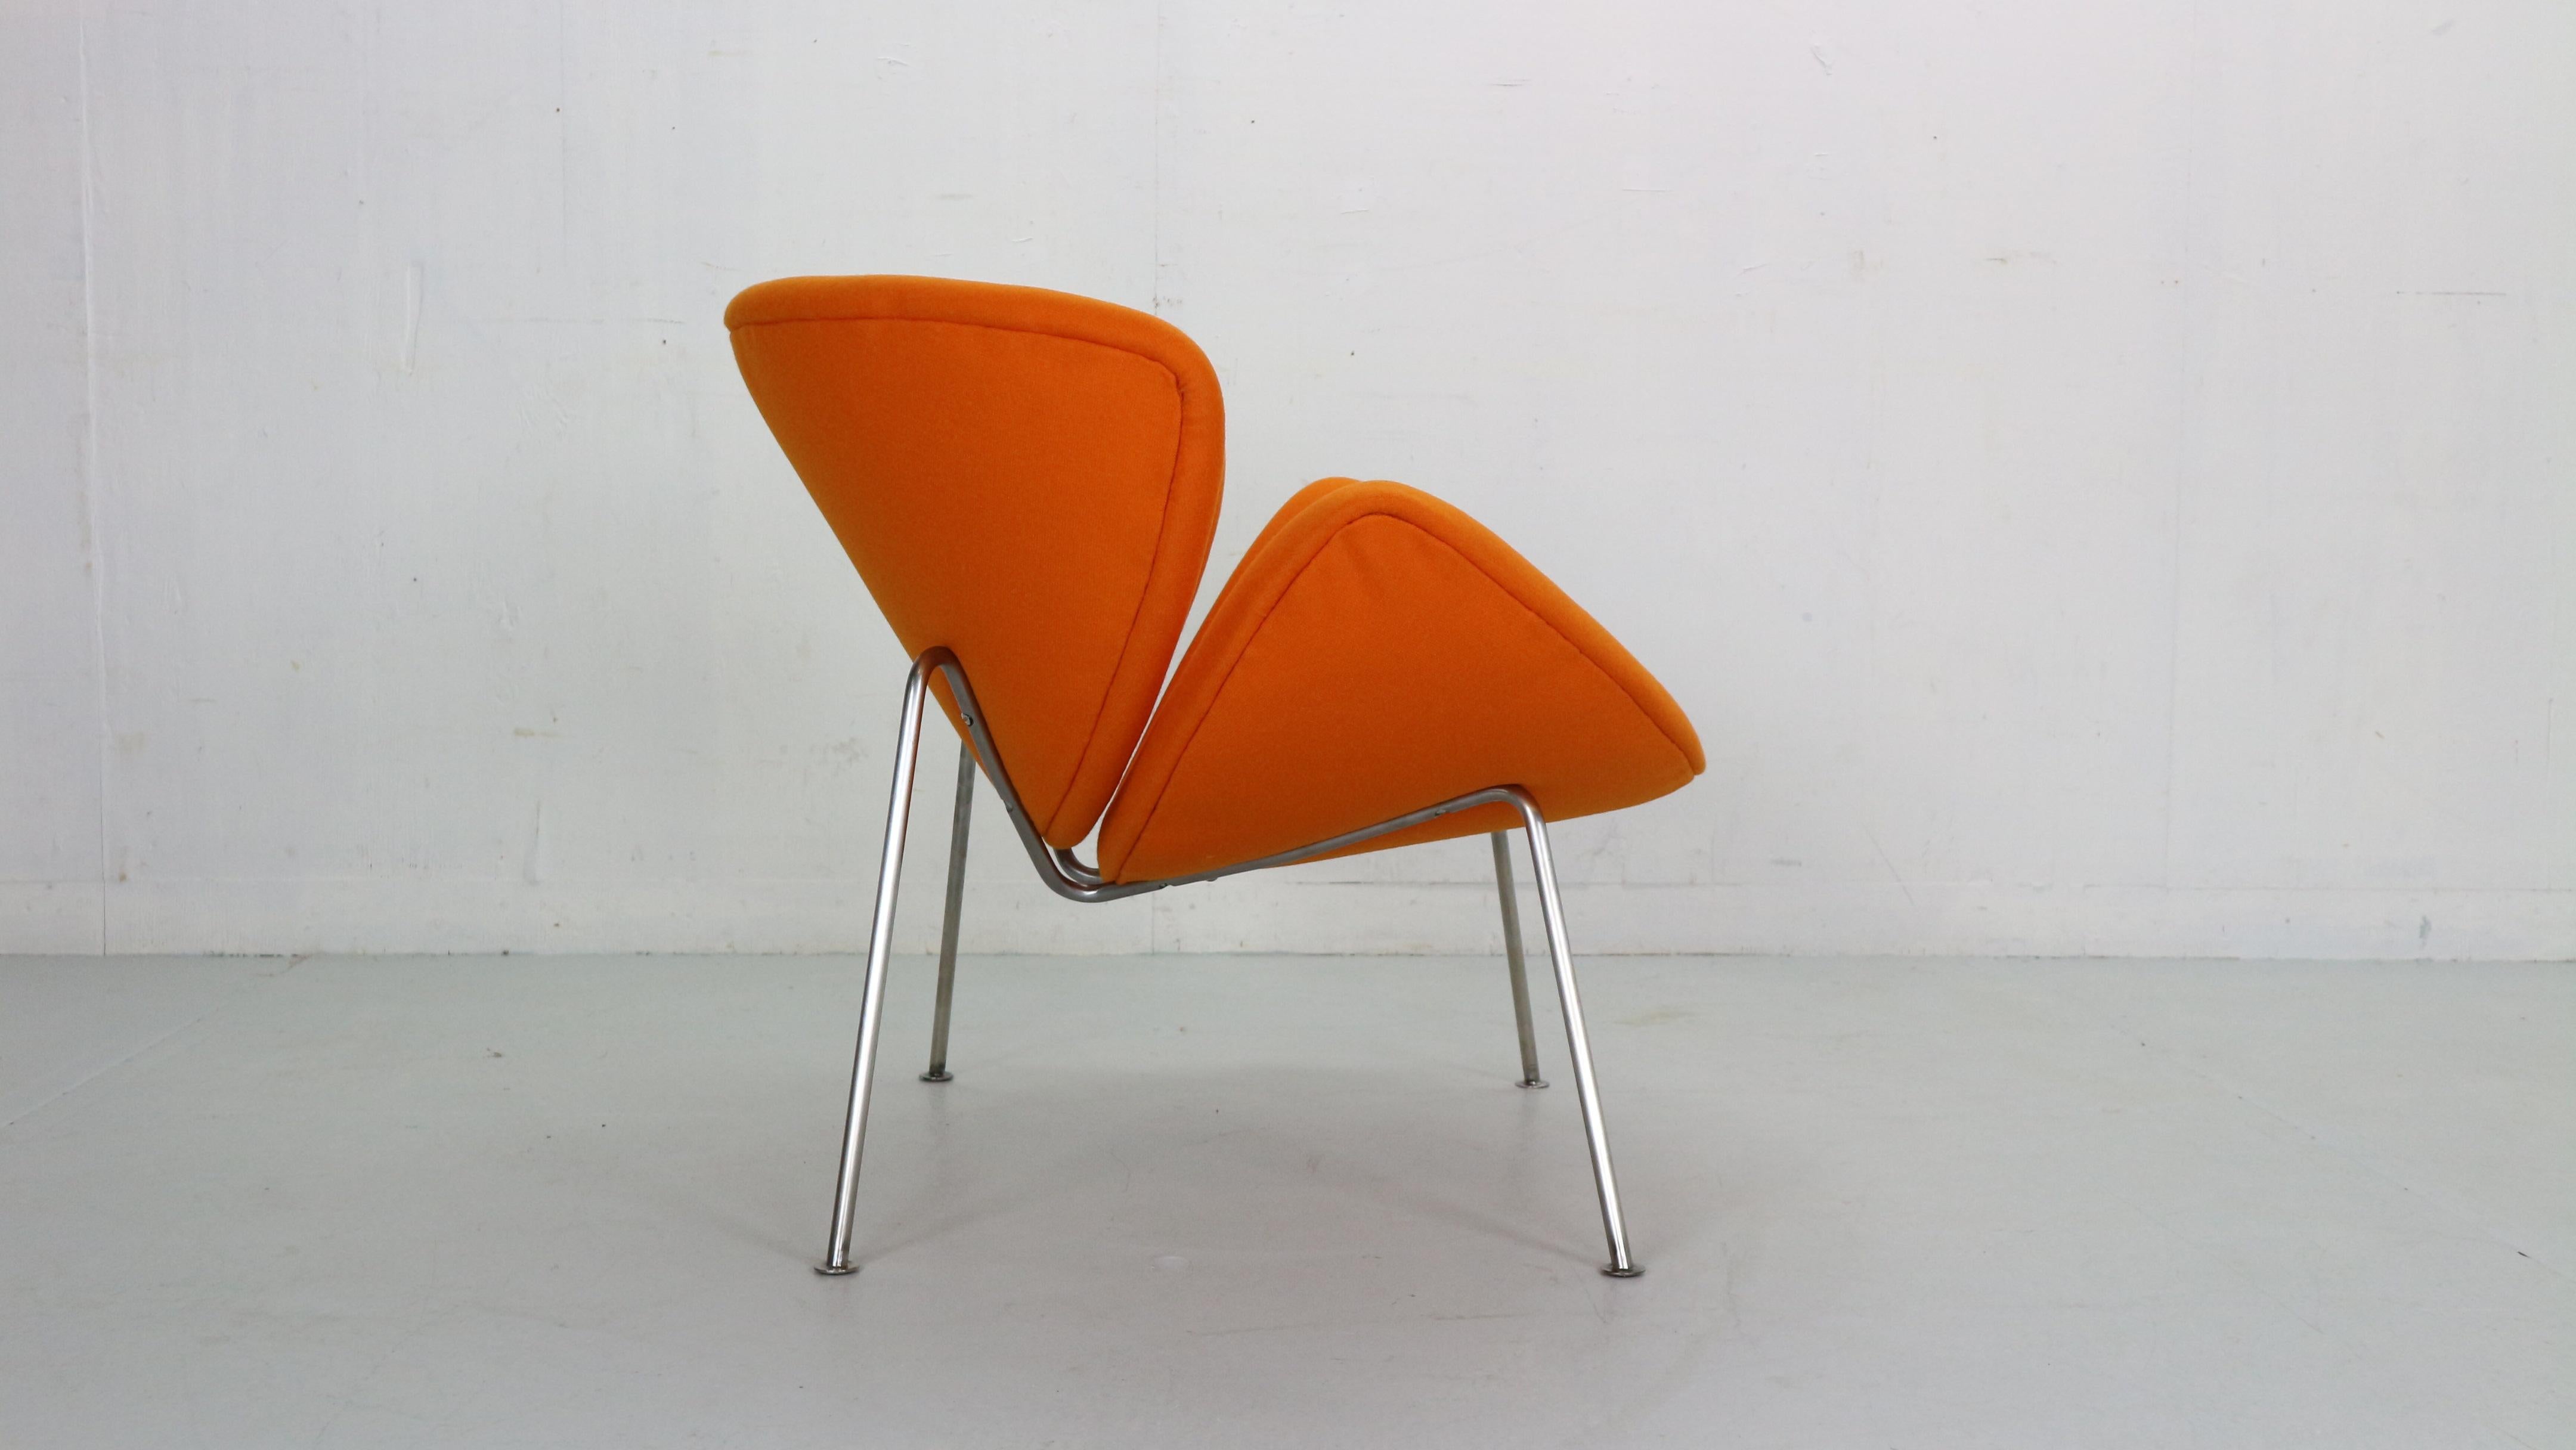 Lounge chair designed by Pierre Paulin for Artifort manufacture, 1960s period, Holland.
The model of the chair is called “Orange Slice